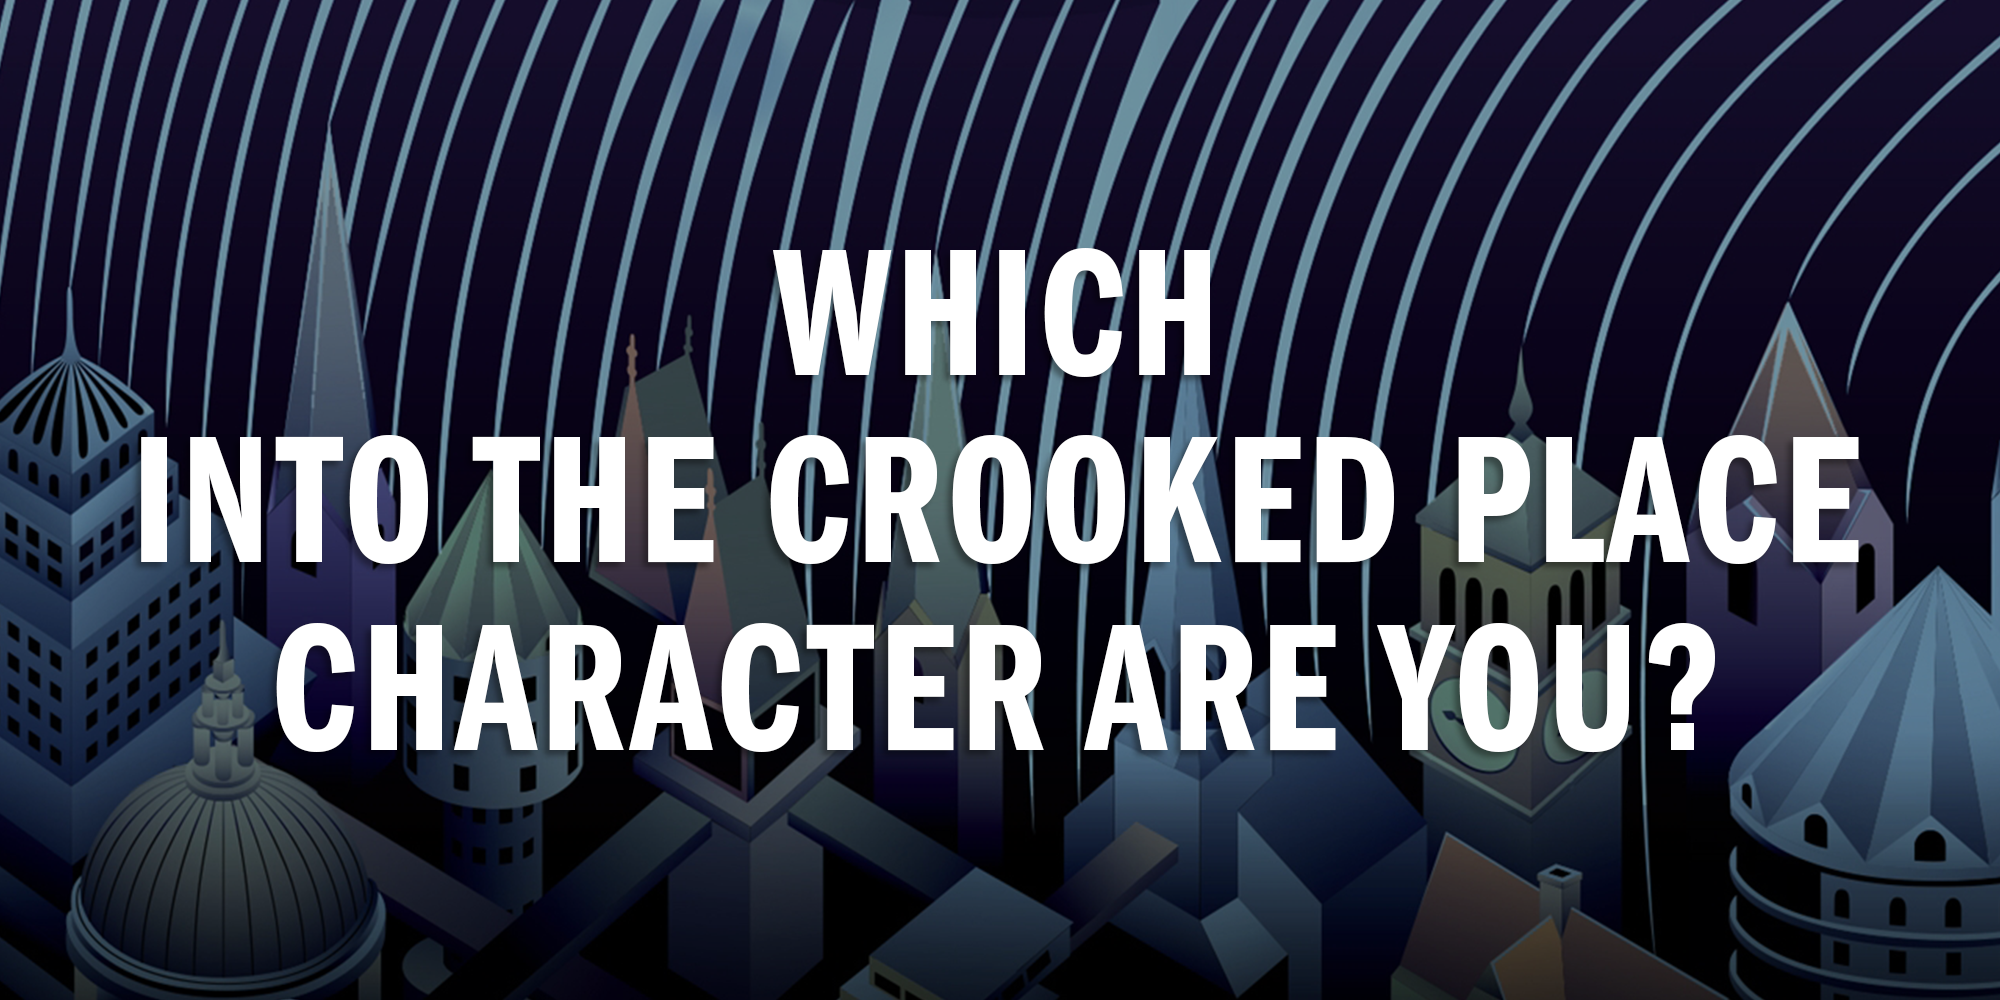 Which Character From Into the Crooked Place Are You?